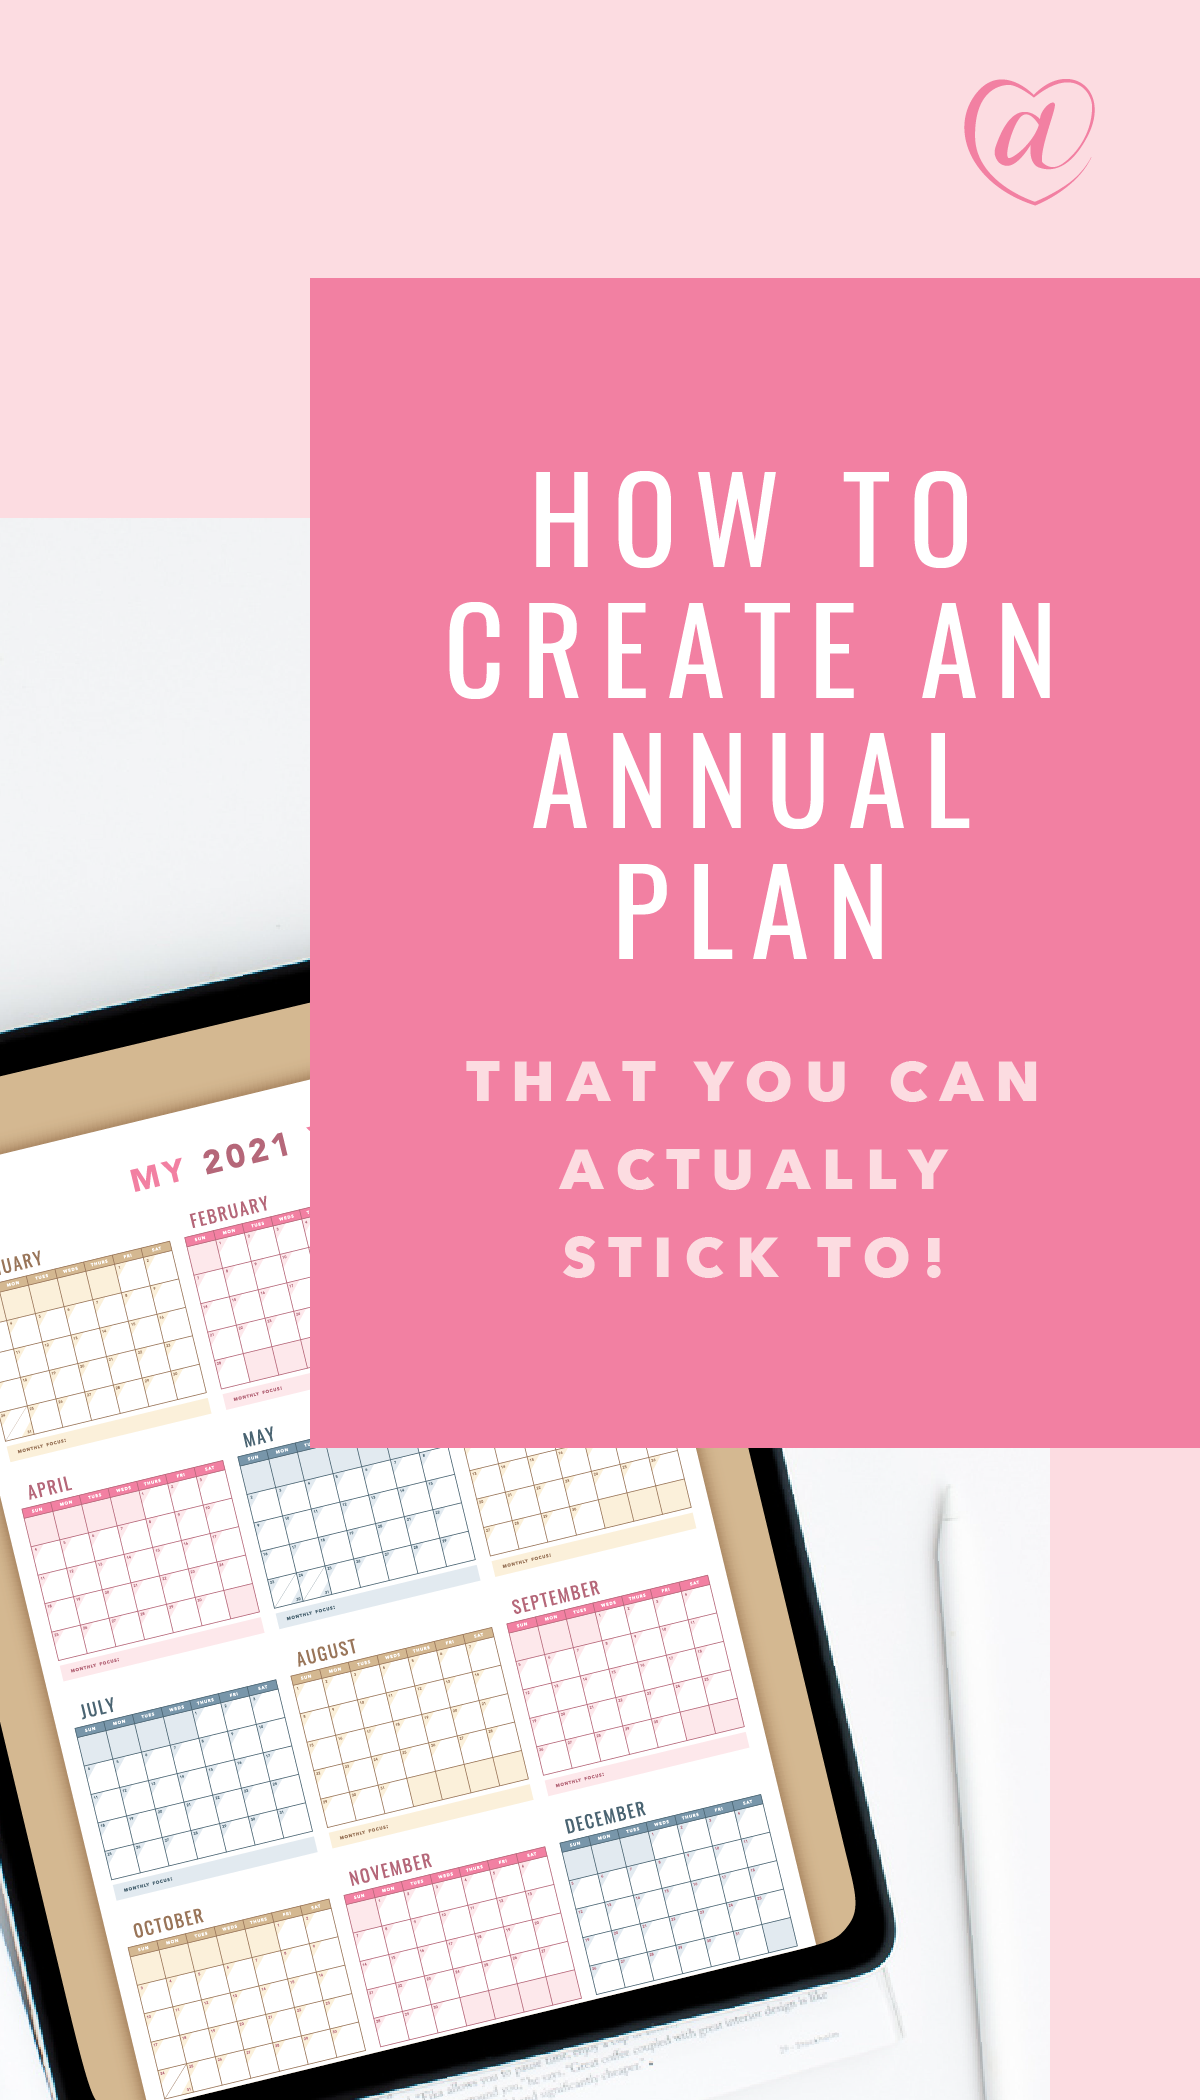 How to Create a 2021 Annual Plan (that you can actually stick to!) // Creative at Heart #quarterlyplanning #endofyear #printablecalendar #2020 #2021